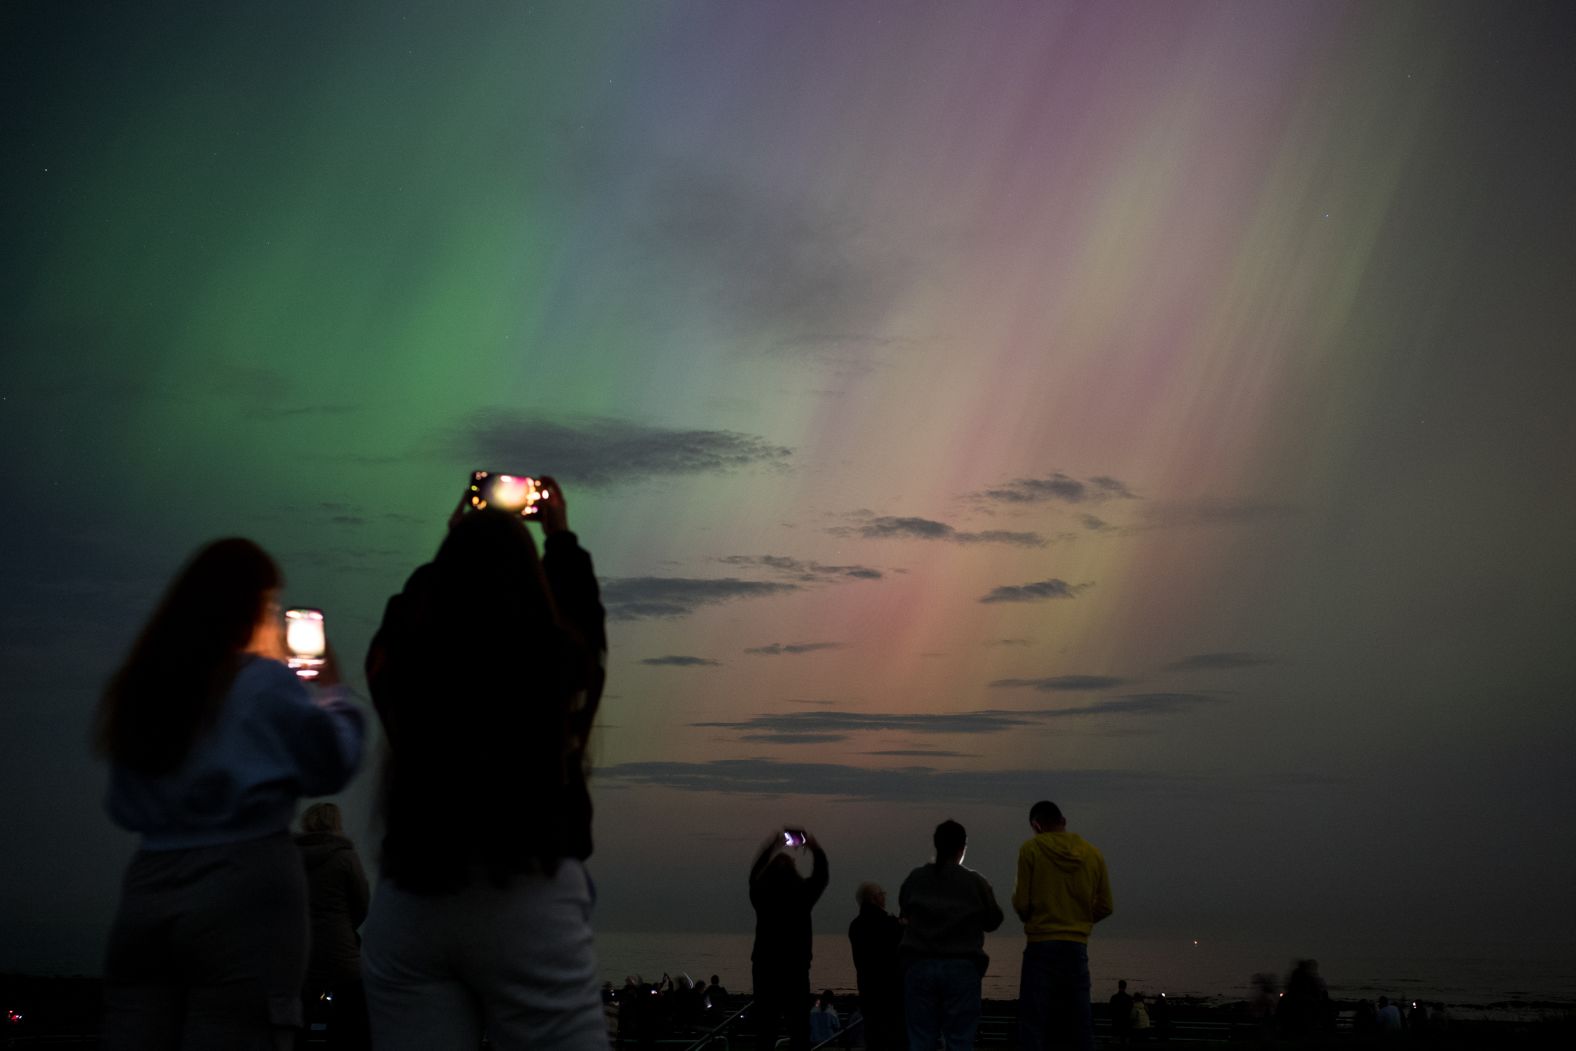 People photograph the northern lights from Whitley Bay, England, on May 10.